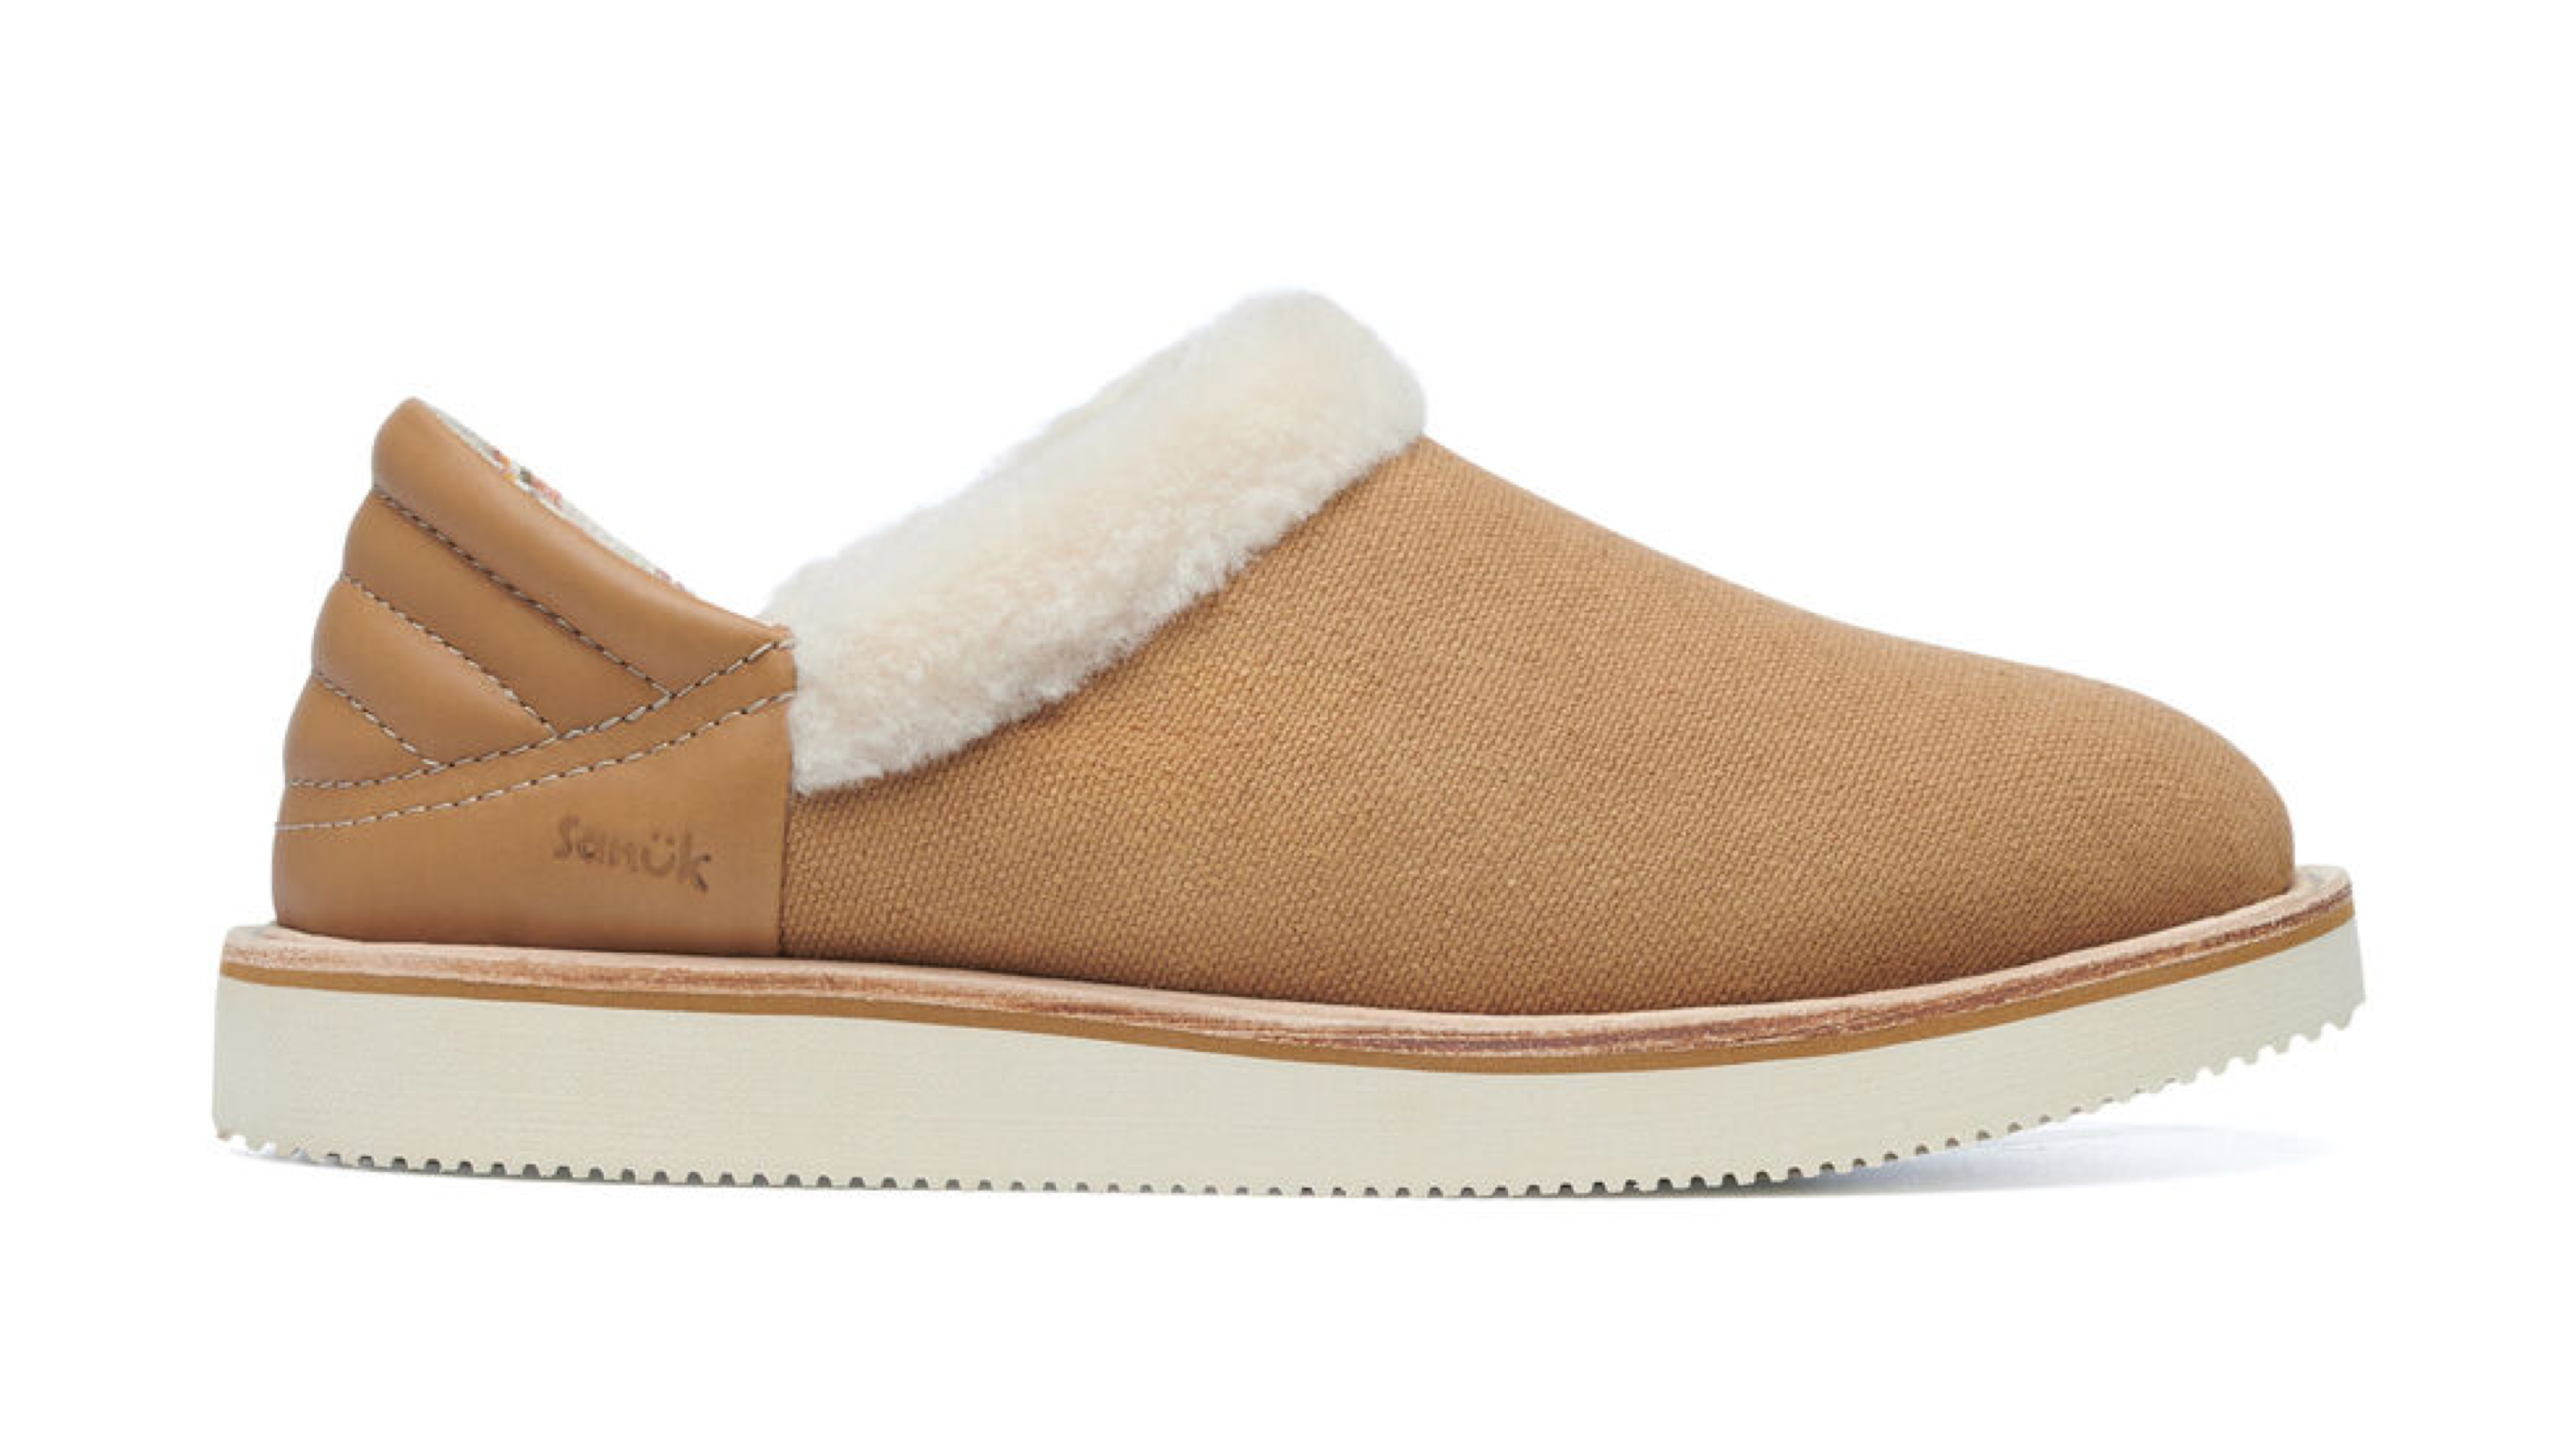 sanuk beige slippers with a shearling lining